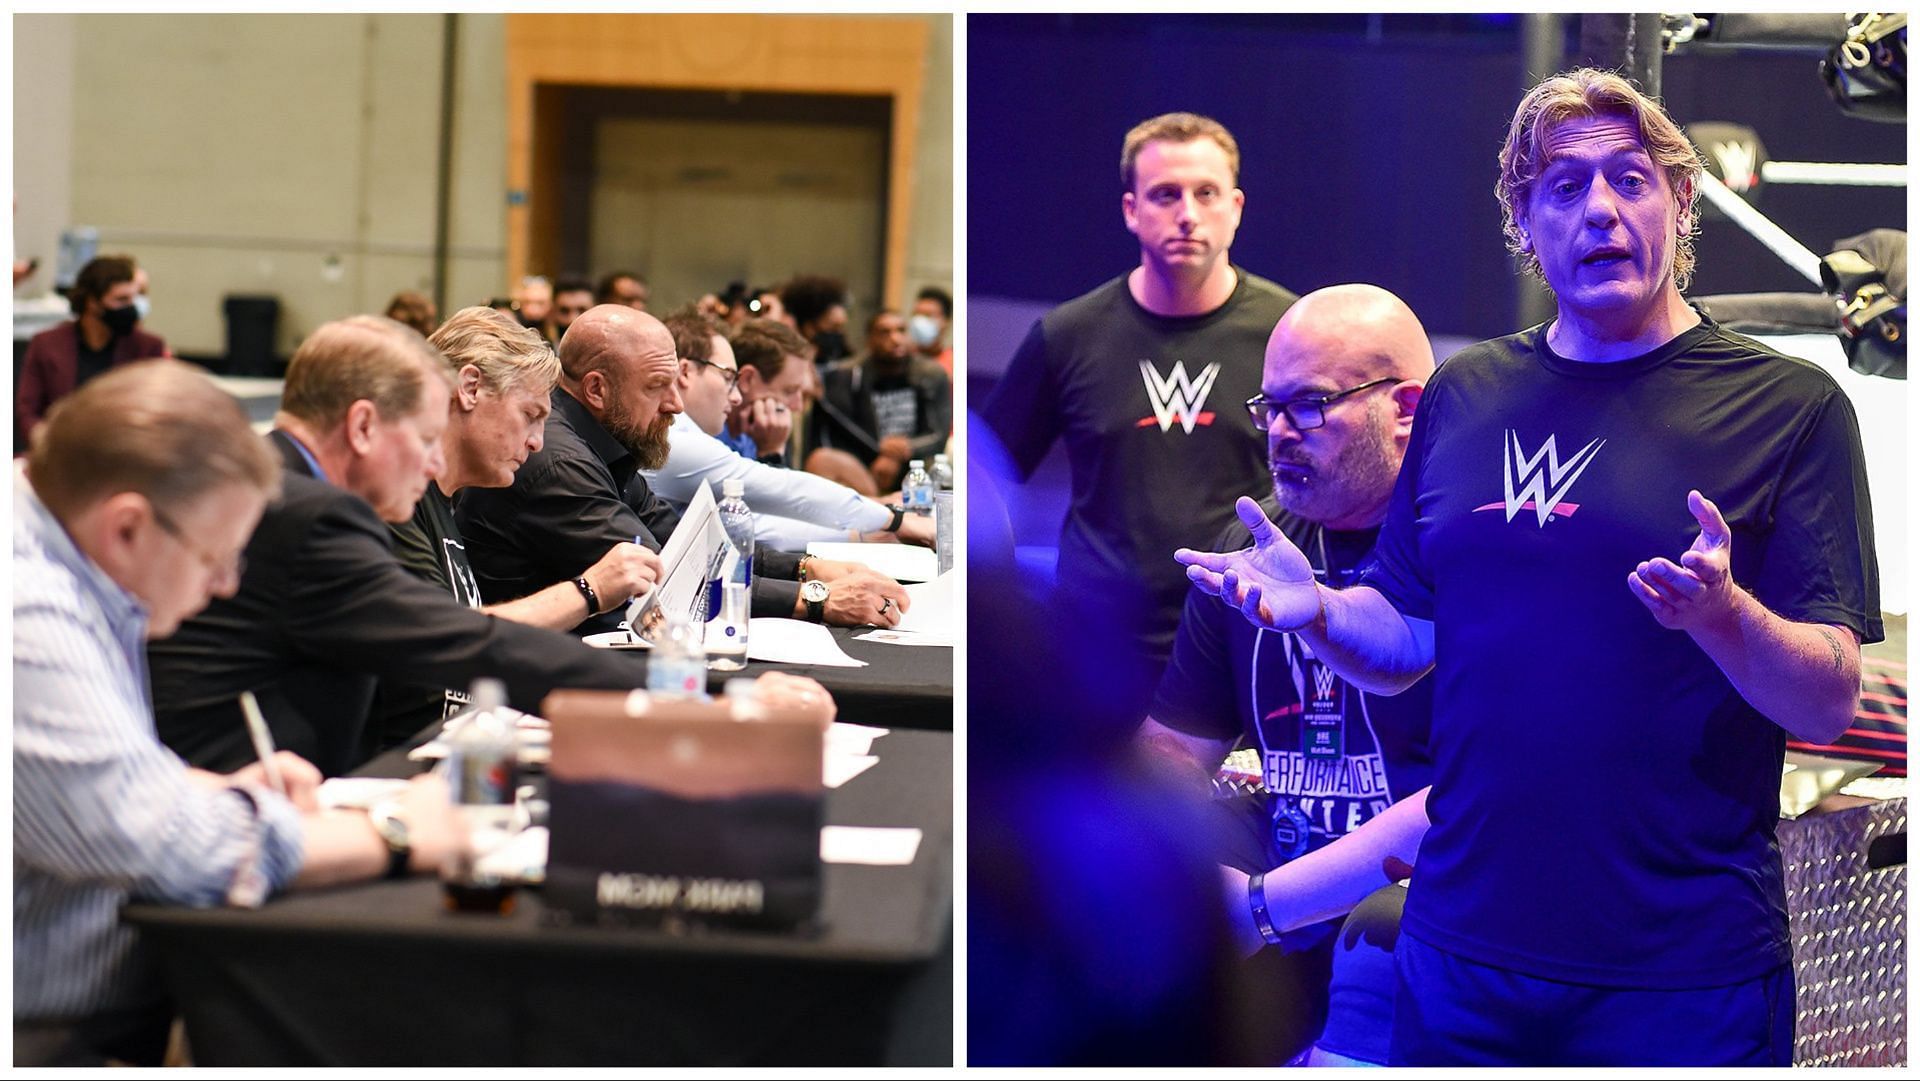 WWE officials take notes at tryout, William Regal speaks to athletes at tryout